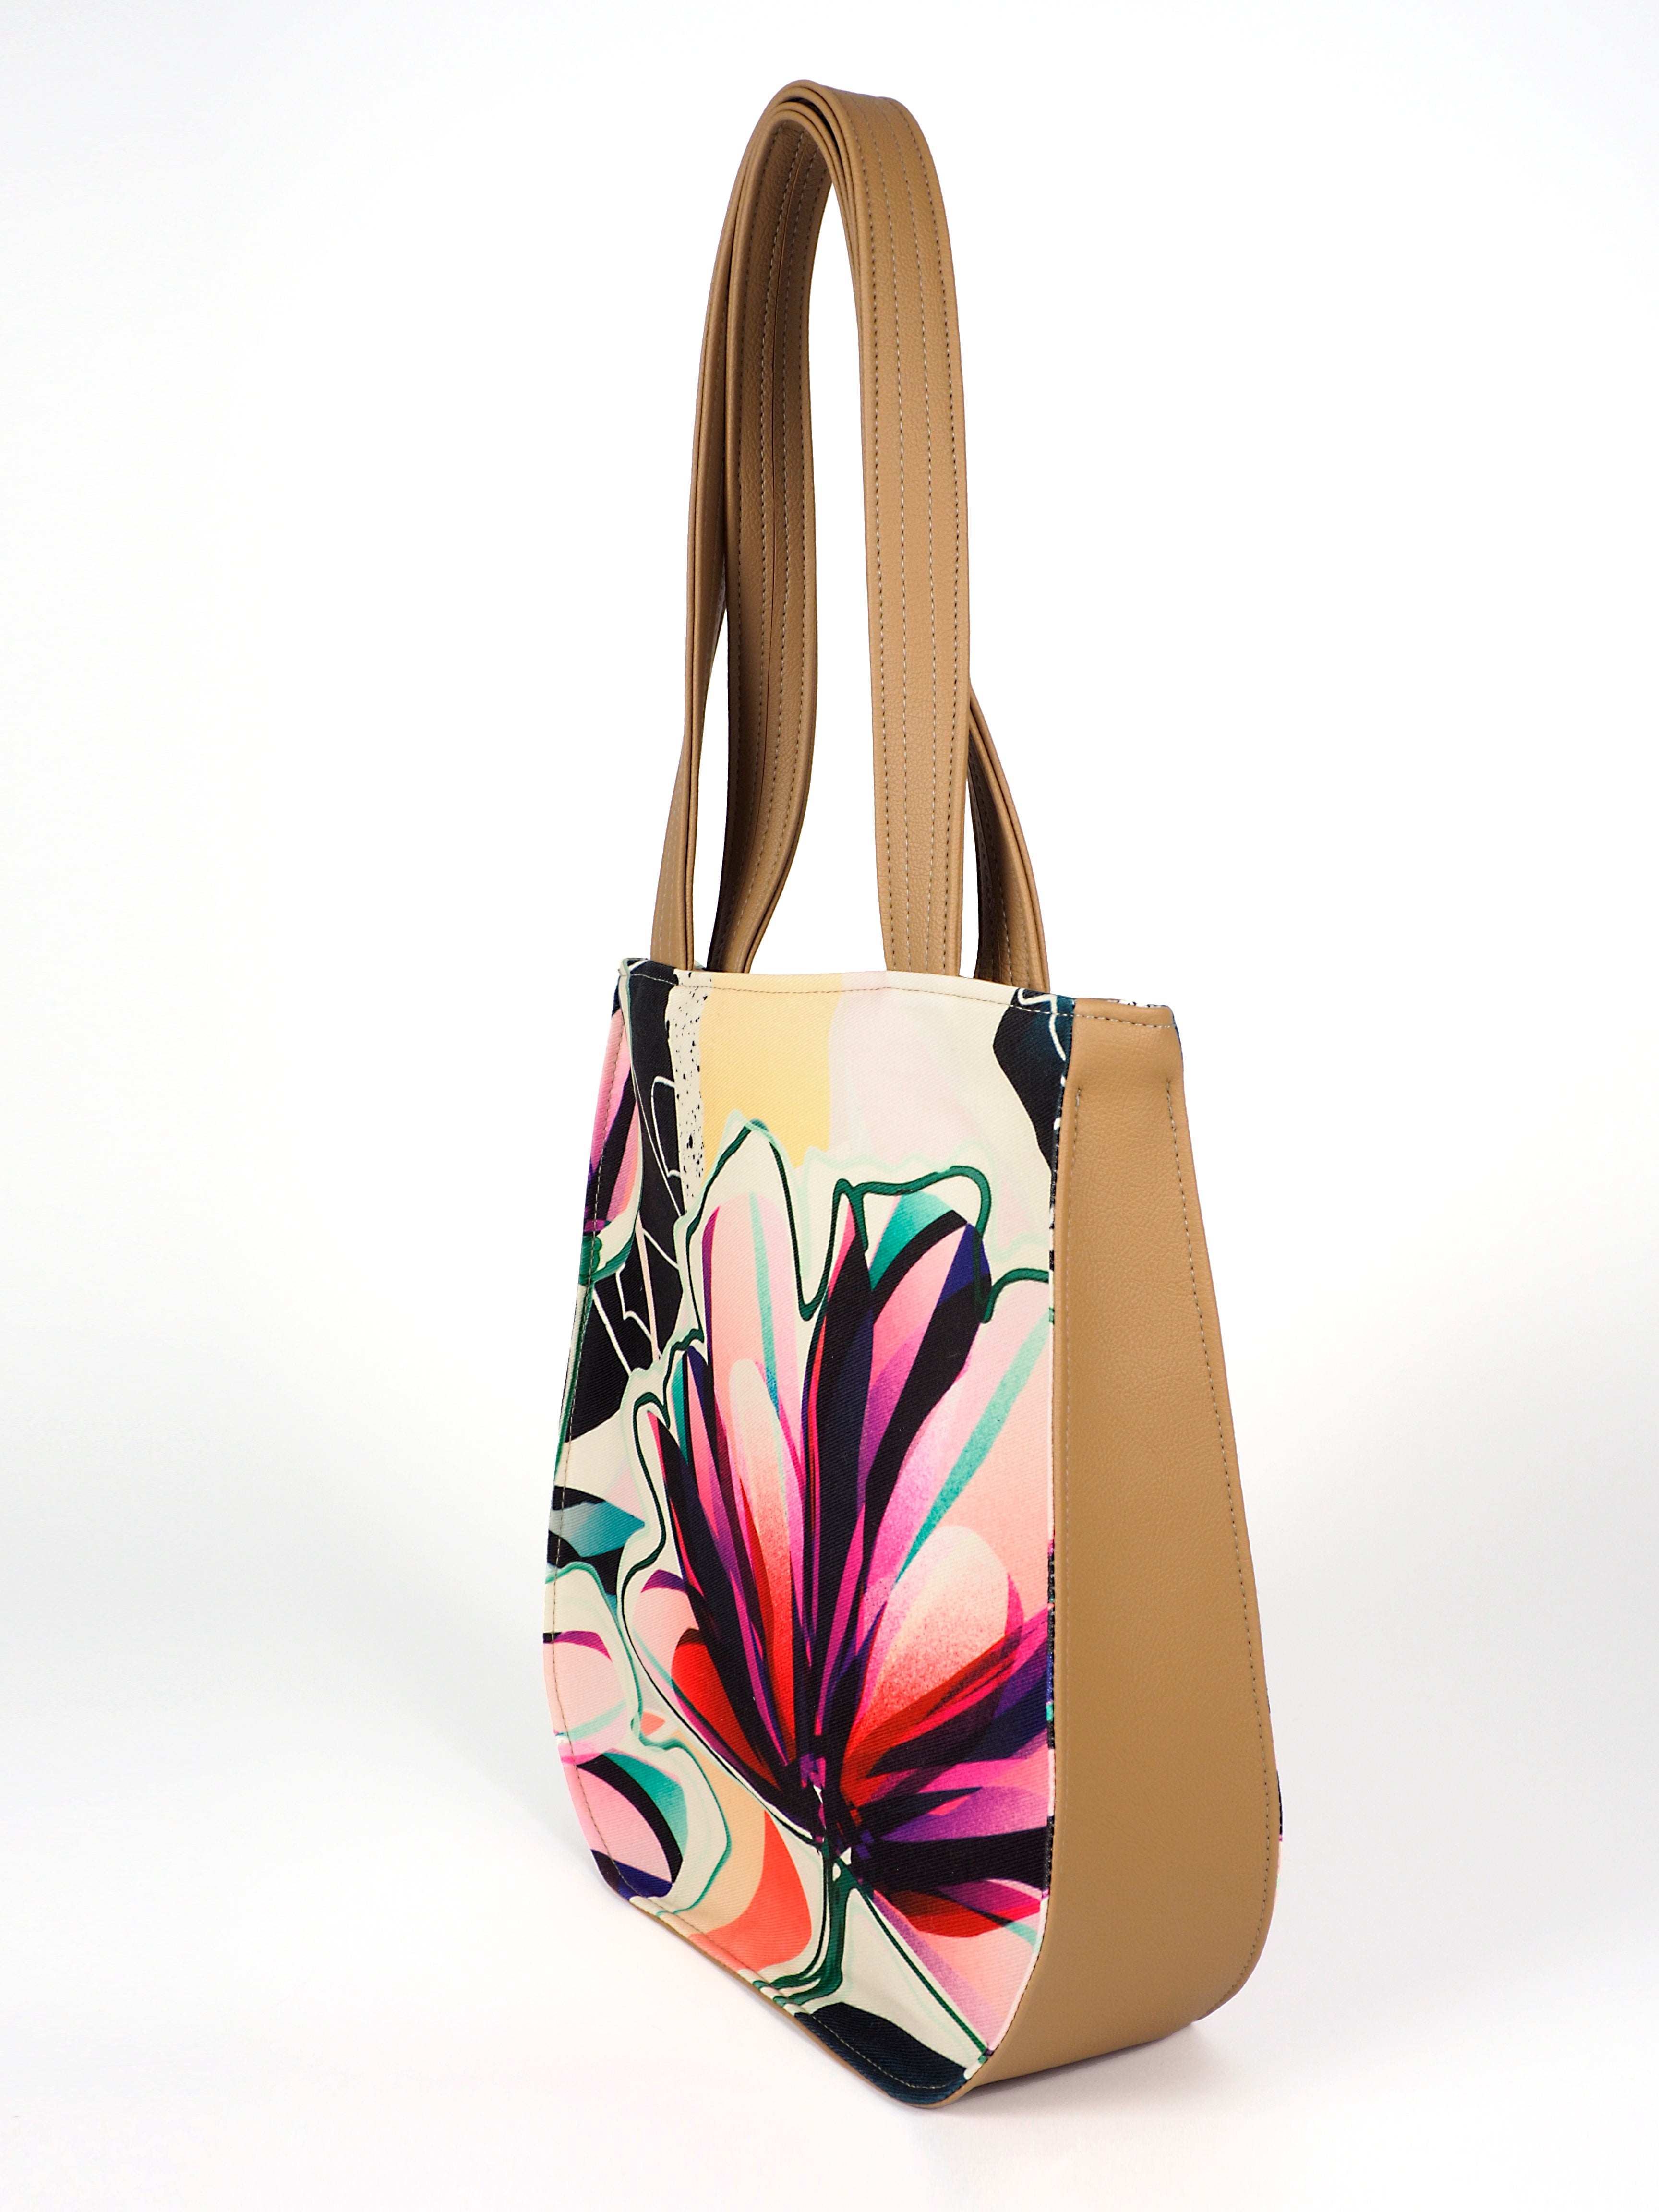 Bardo style bag - Тenderness - Premium style bag from BARDO ART WORKS - Just lvbeige, green, leaves, pink, red, Rosily, summer69.00! Shop now at BARDO ART WORKS